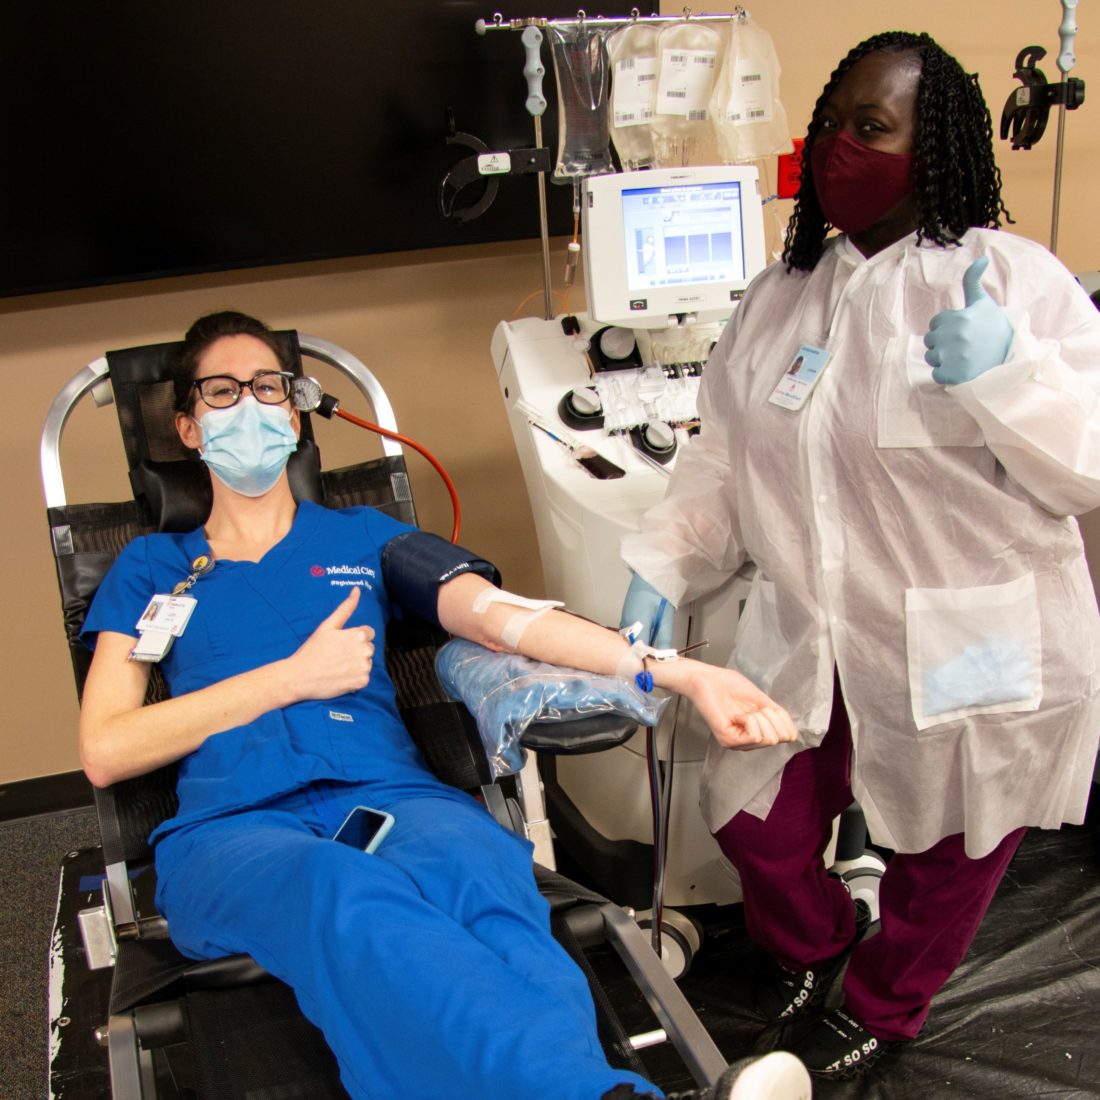 Two female healthcare workers giving thumbs up sign as one donates blood